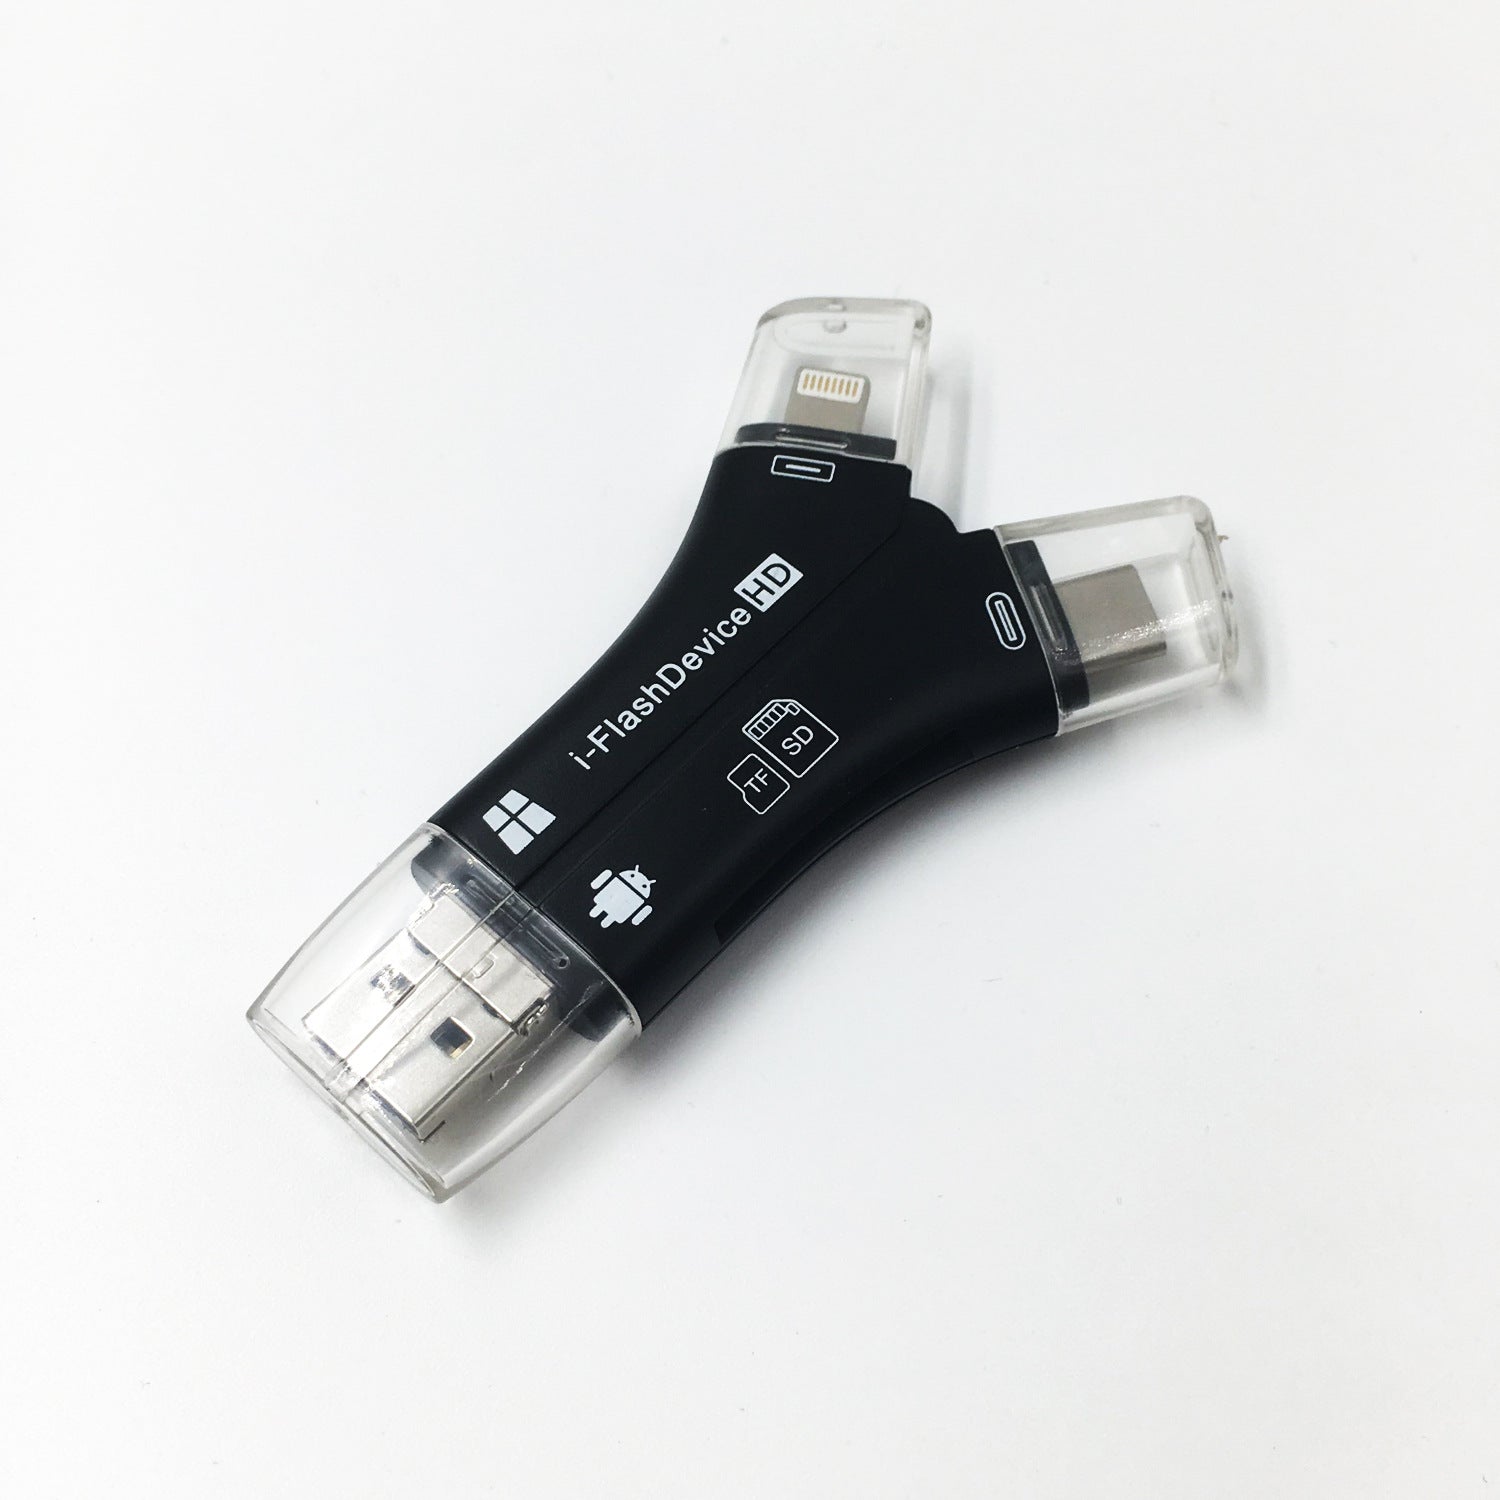 4 in 1 iflash drive card reader